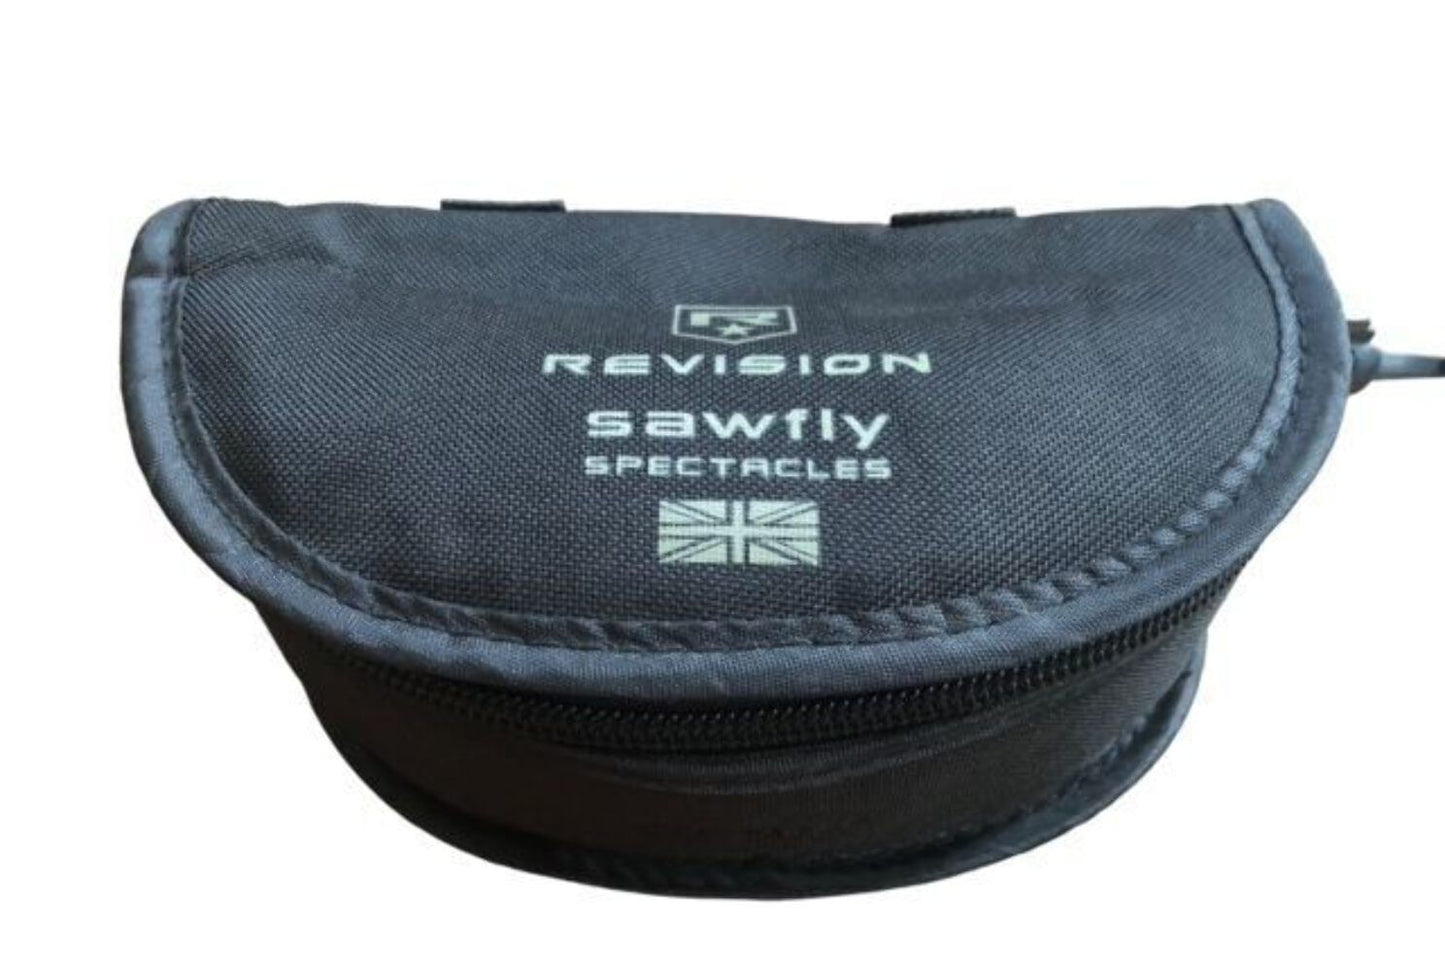 British Army Revision Sawfly protective glasses and case